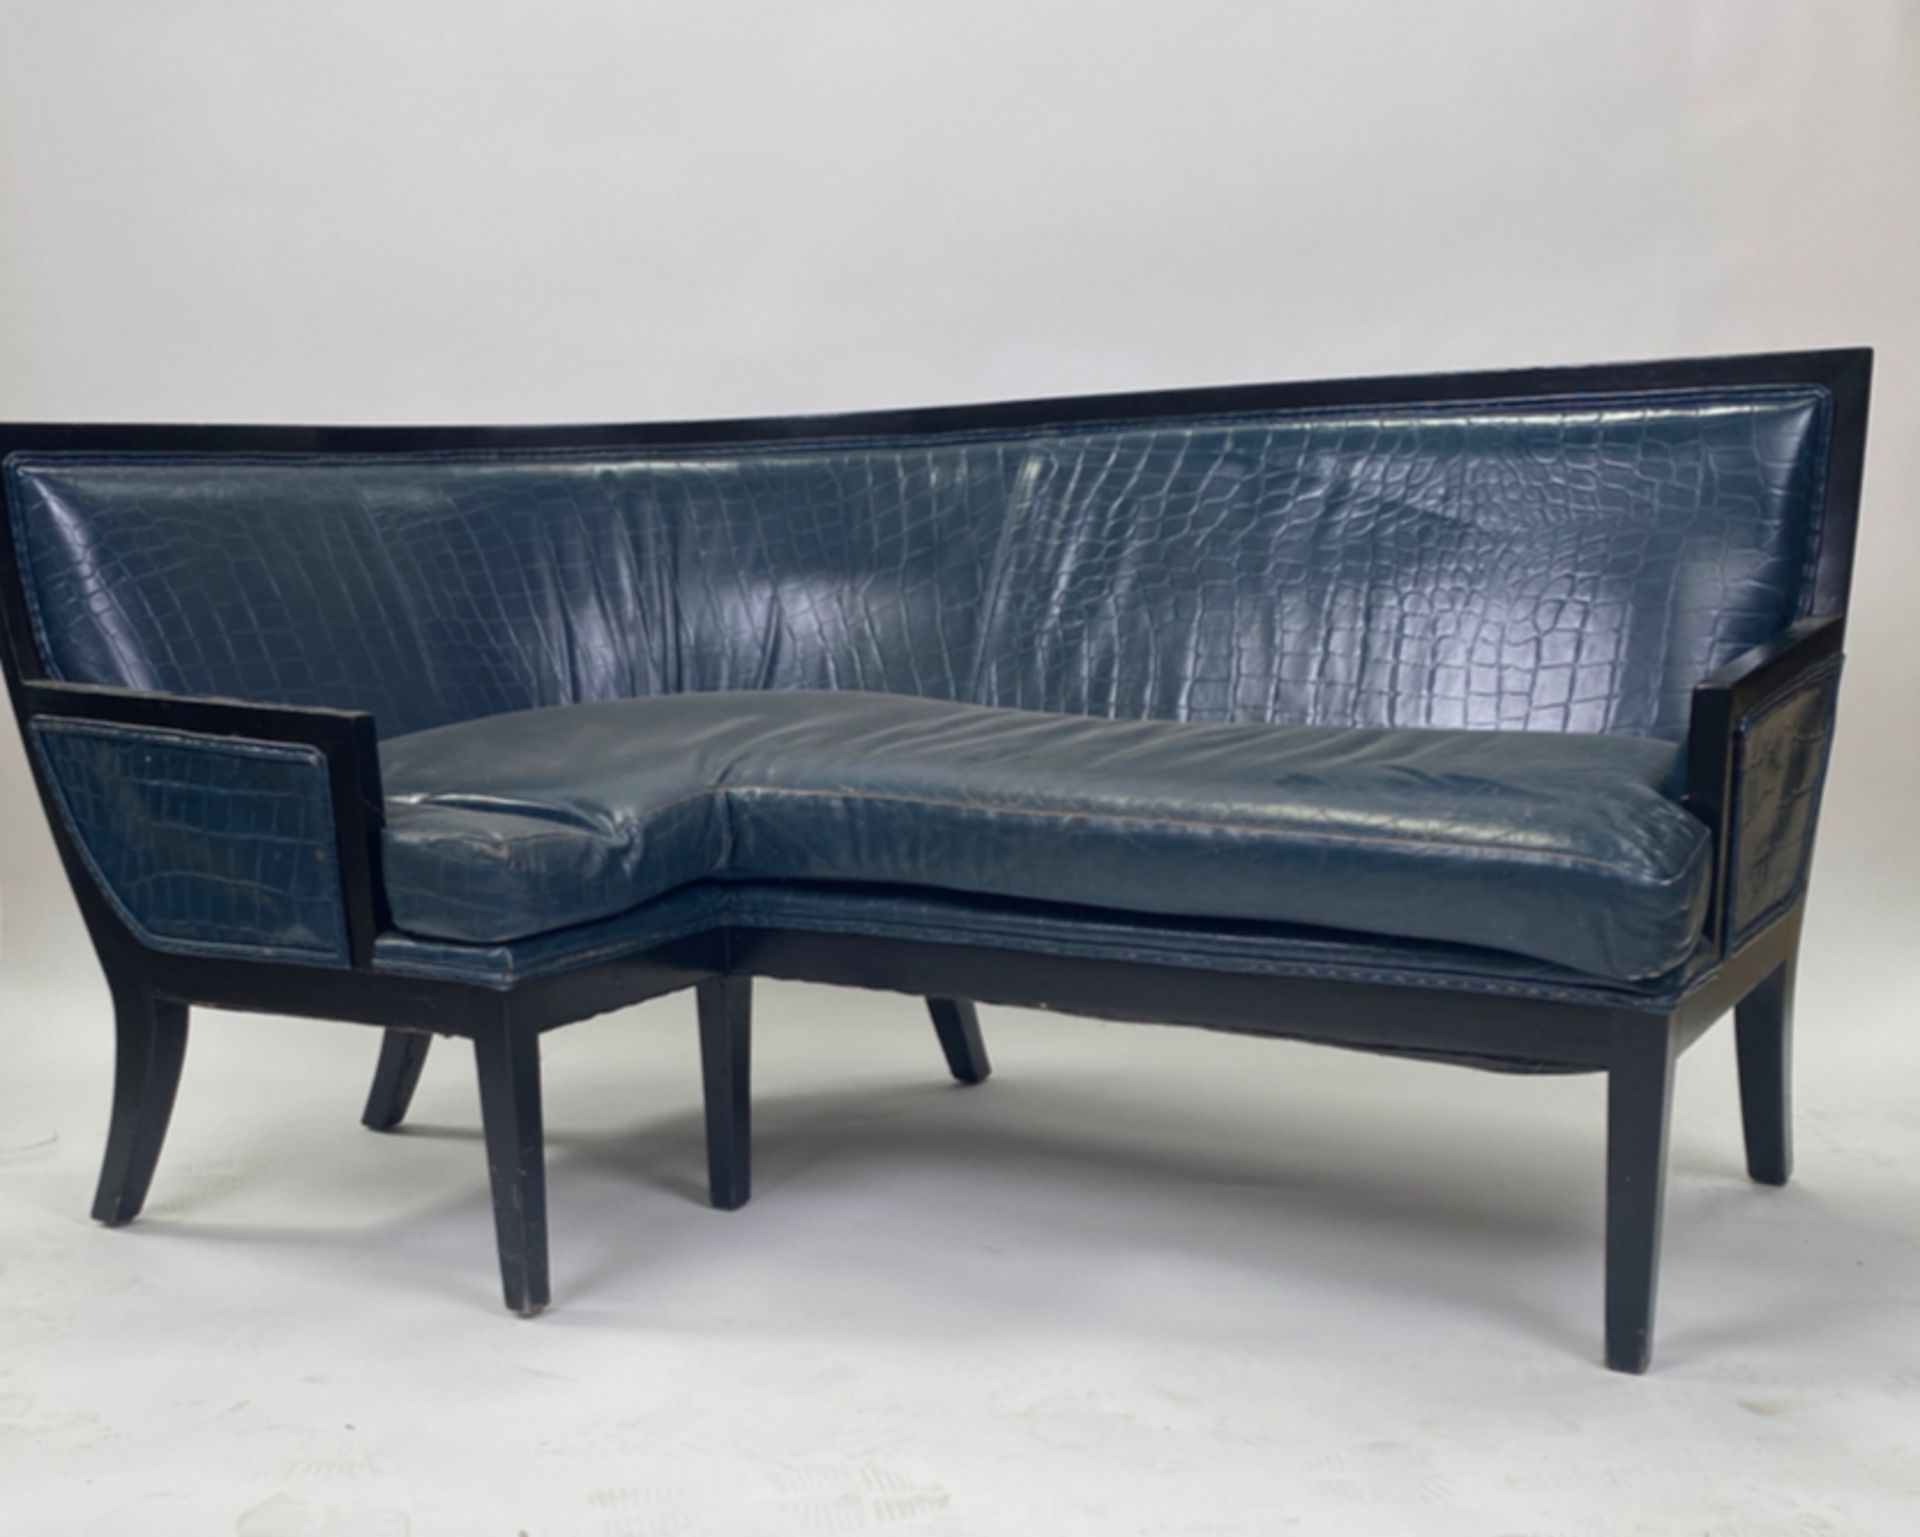 Iconic Berkeley Blue Bar Sofa Commissioned by David Collins